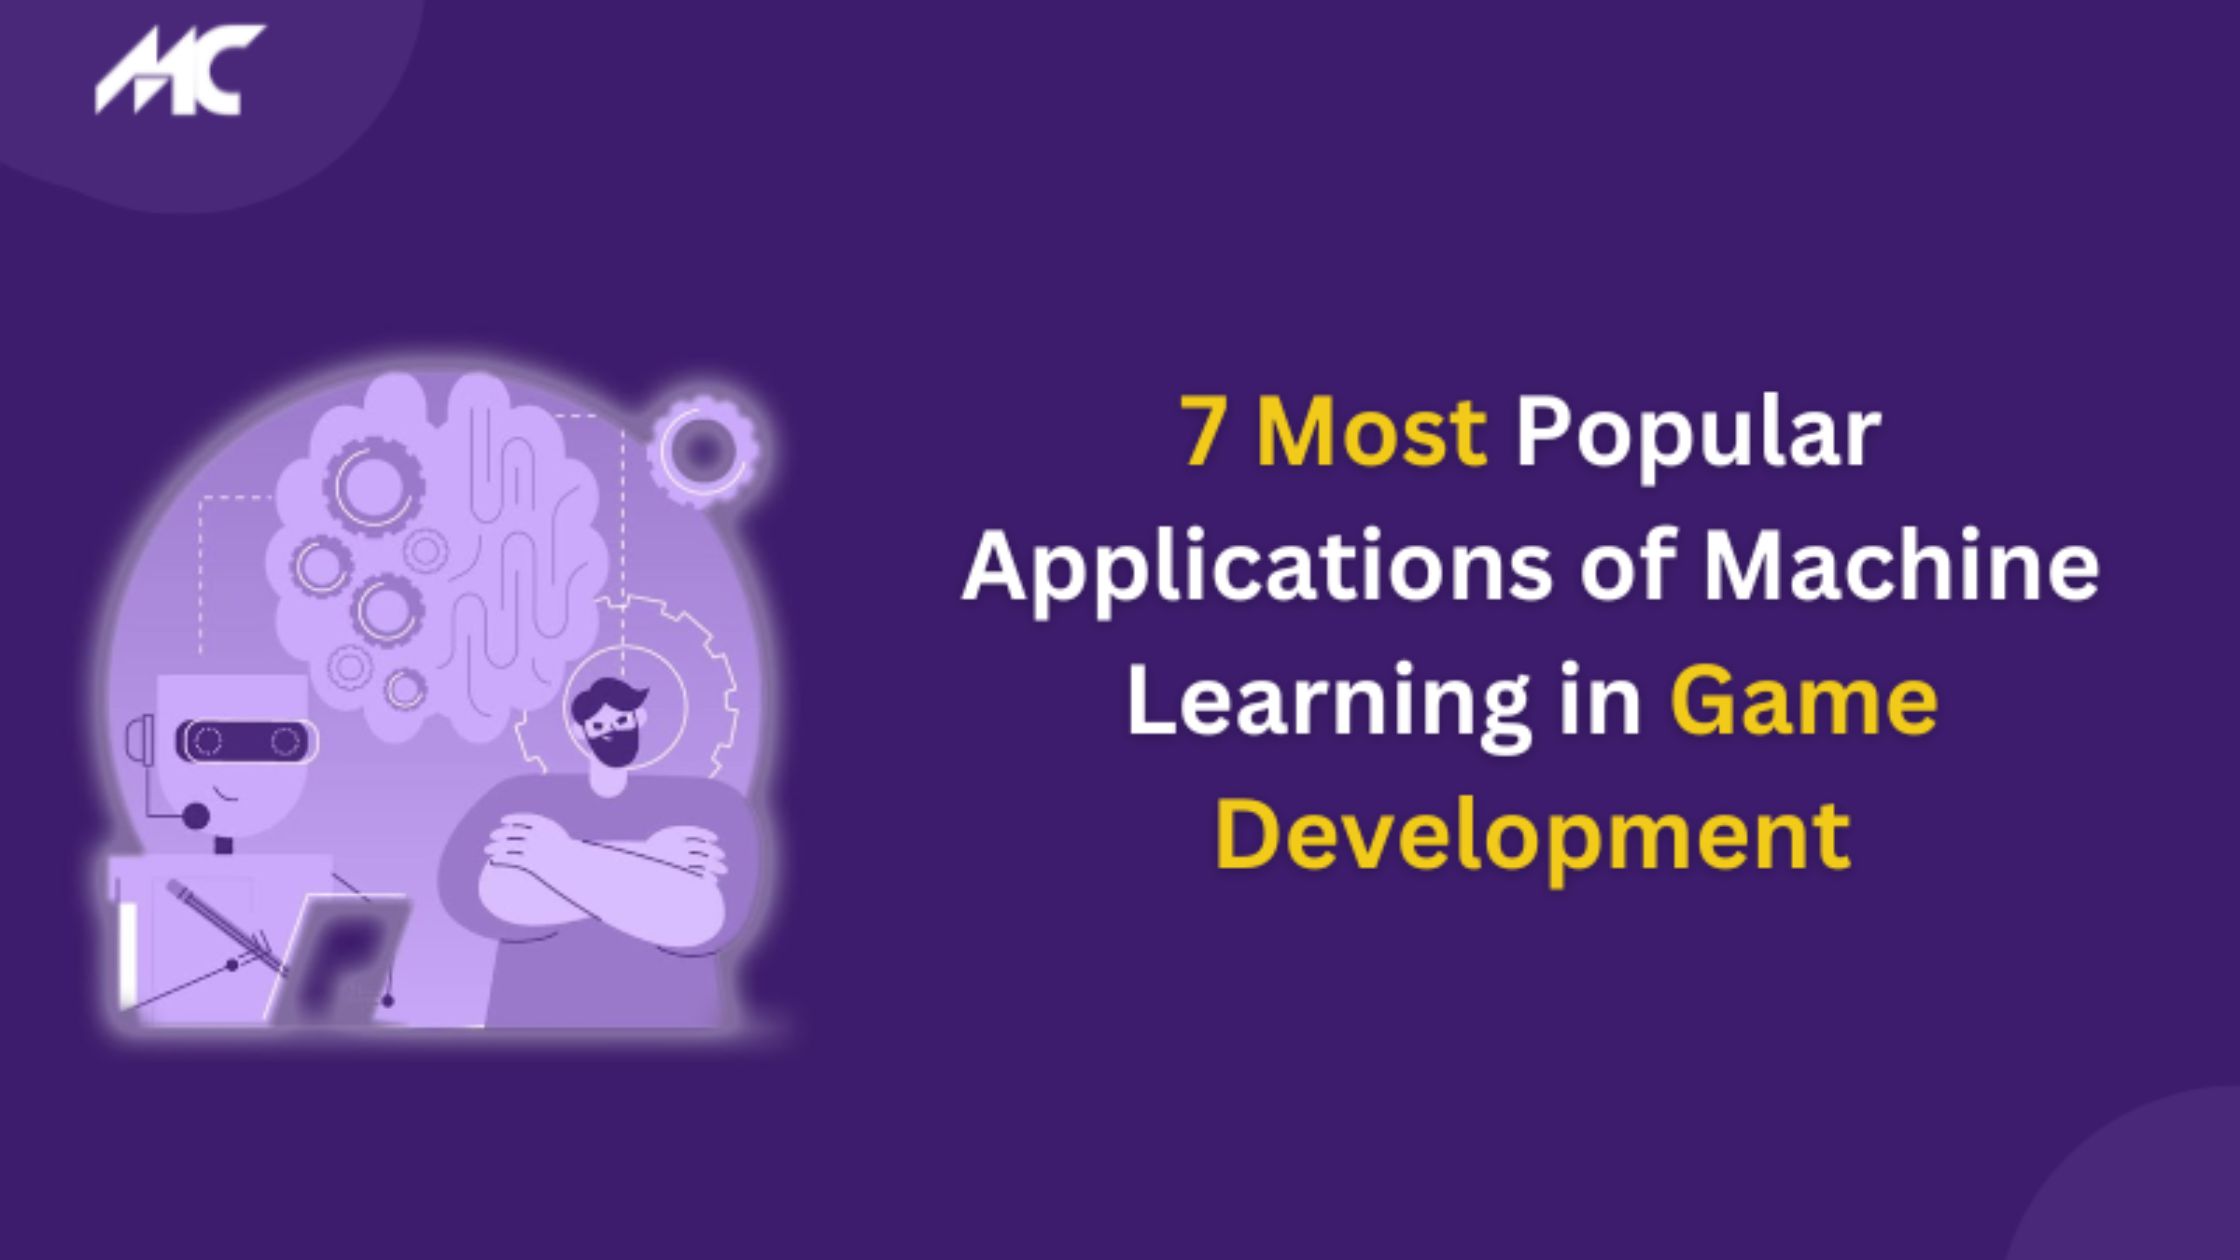 Most Popular Applications of Machine Learning in Game Development